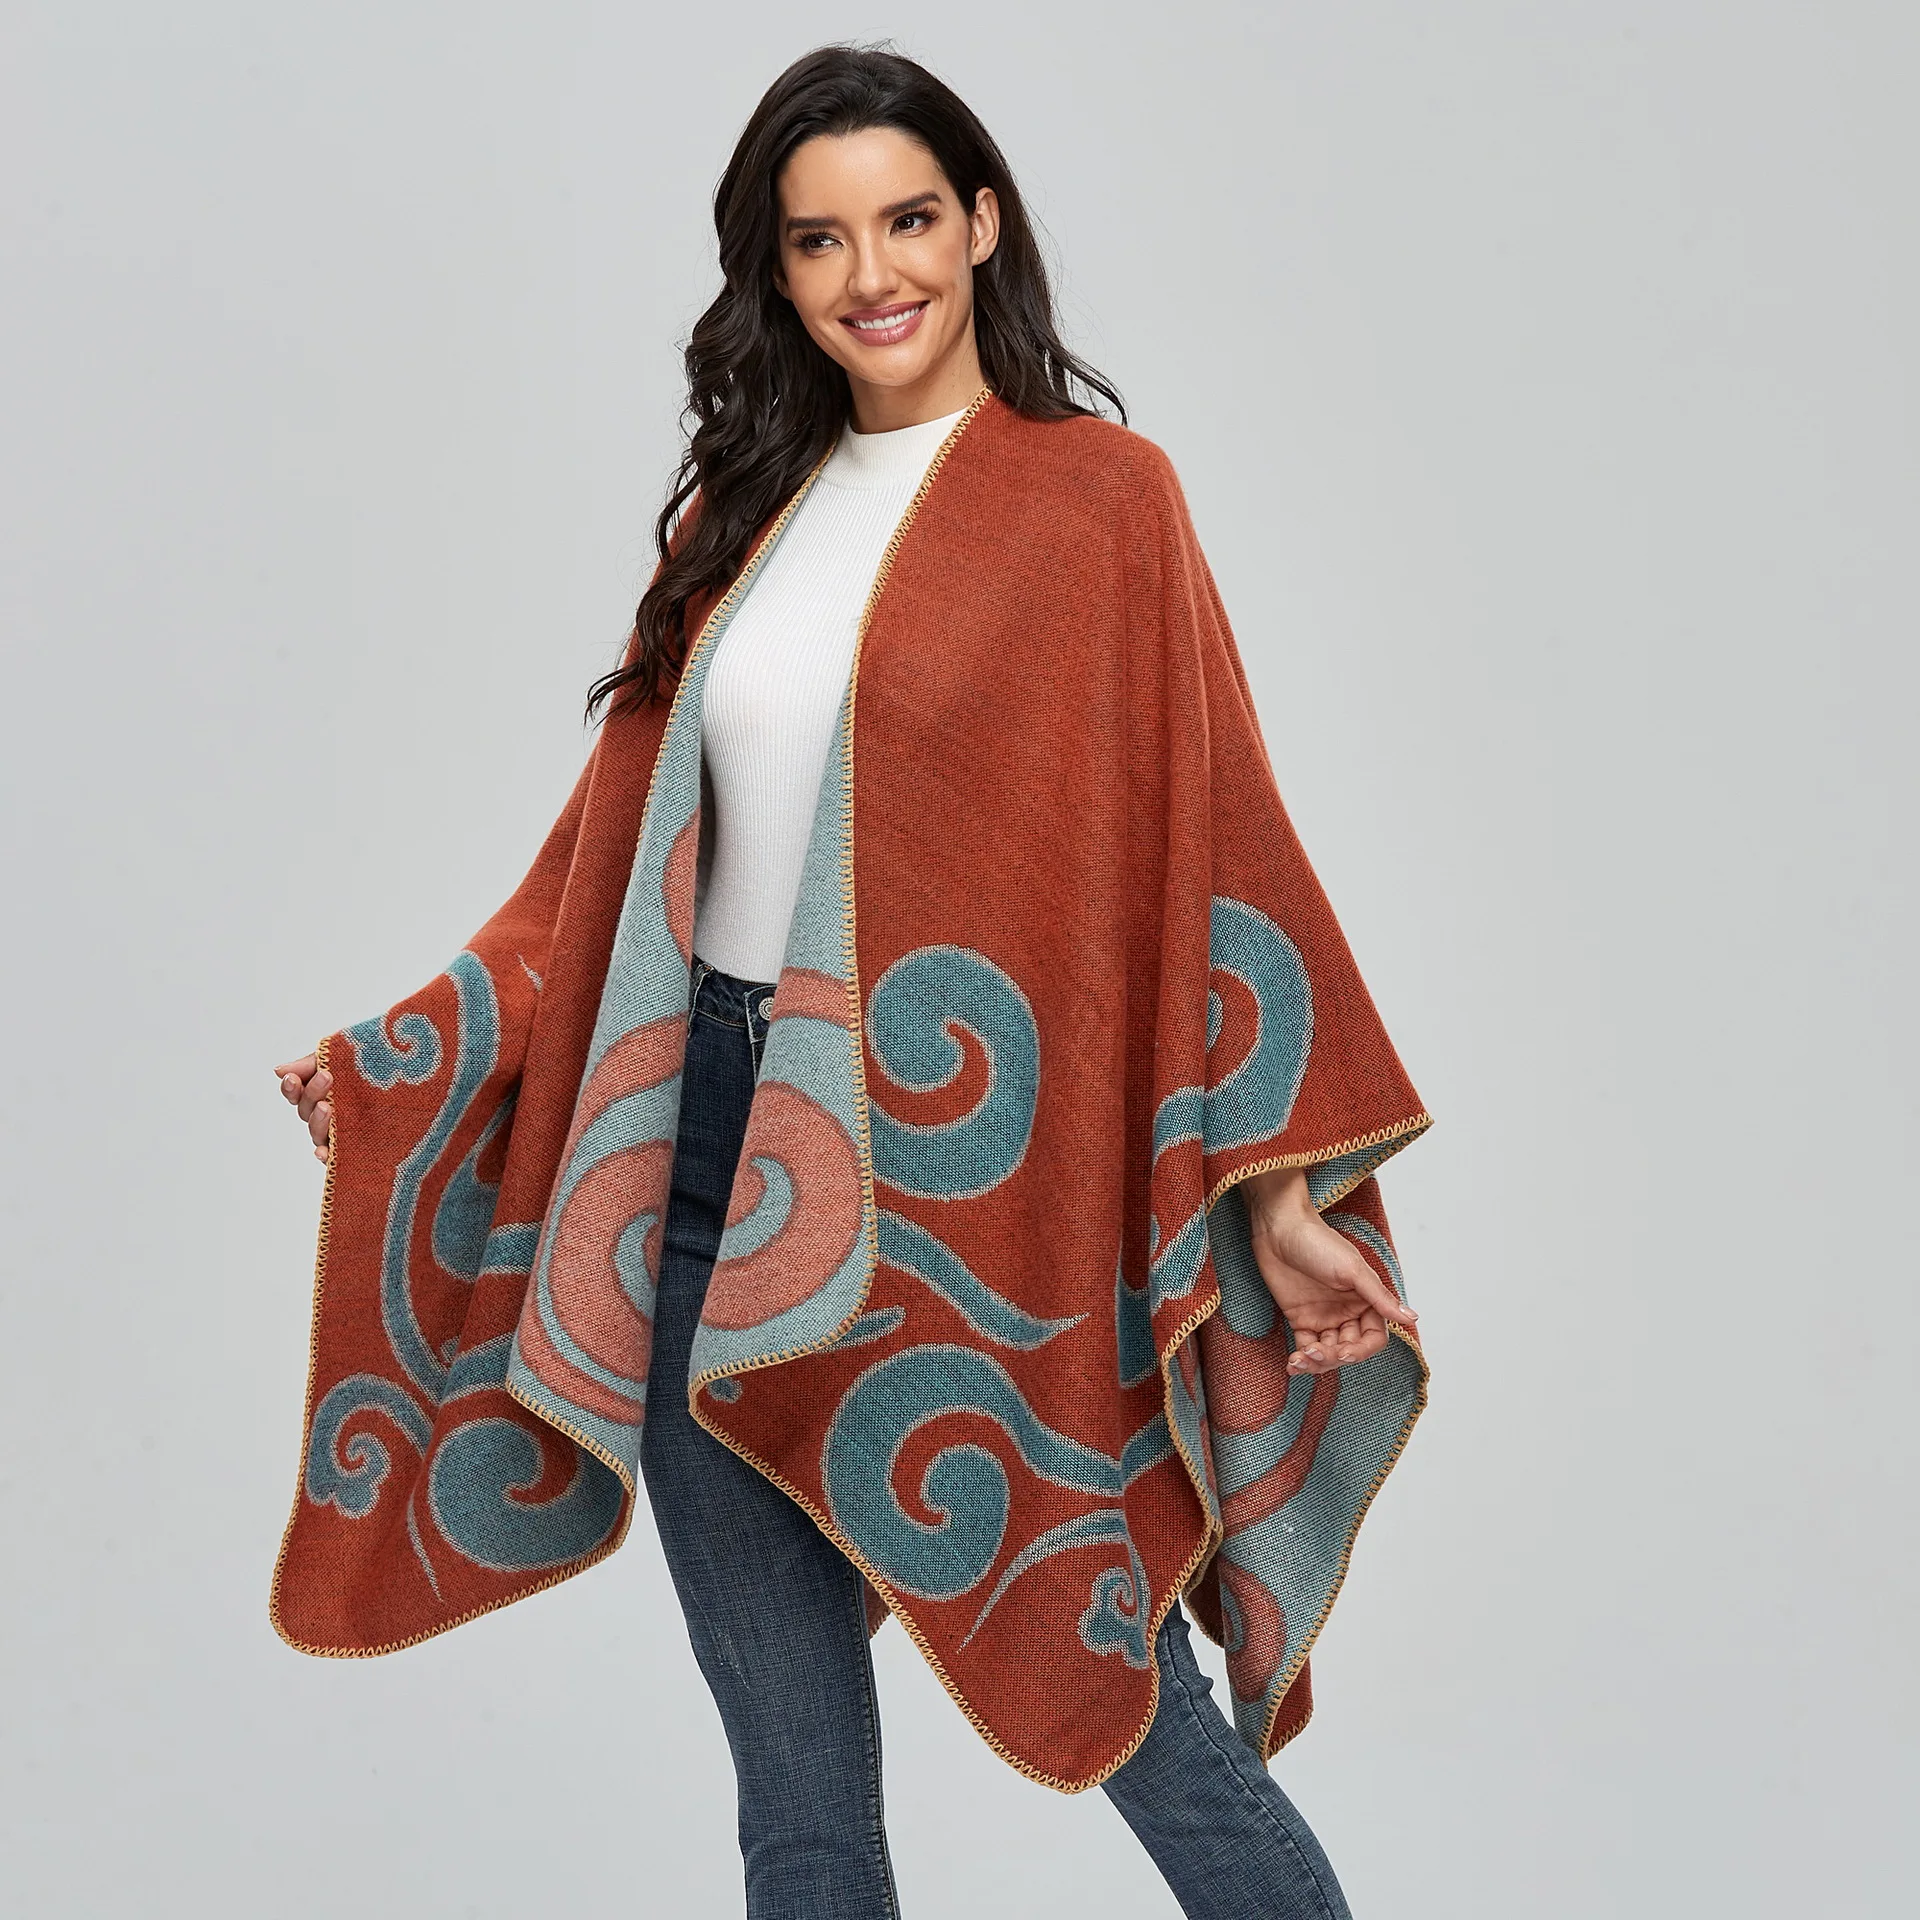 CARCOS Ponchos for Women Shawls and Wraps Poncho with Buttons Fringe Shawl Cape Sweater Scarf Multiway for Spring Autumn Winter 